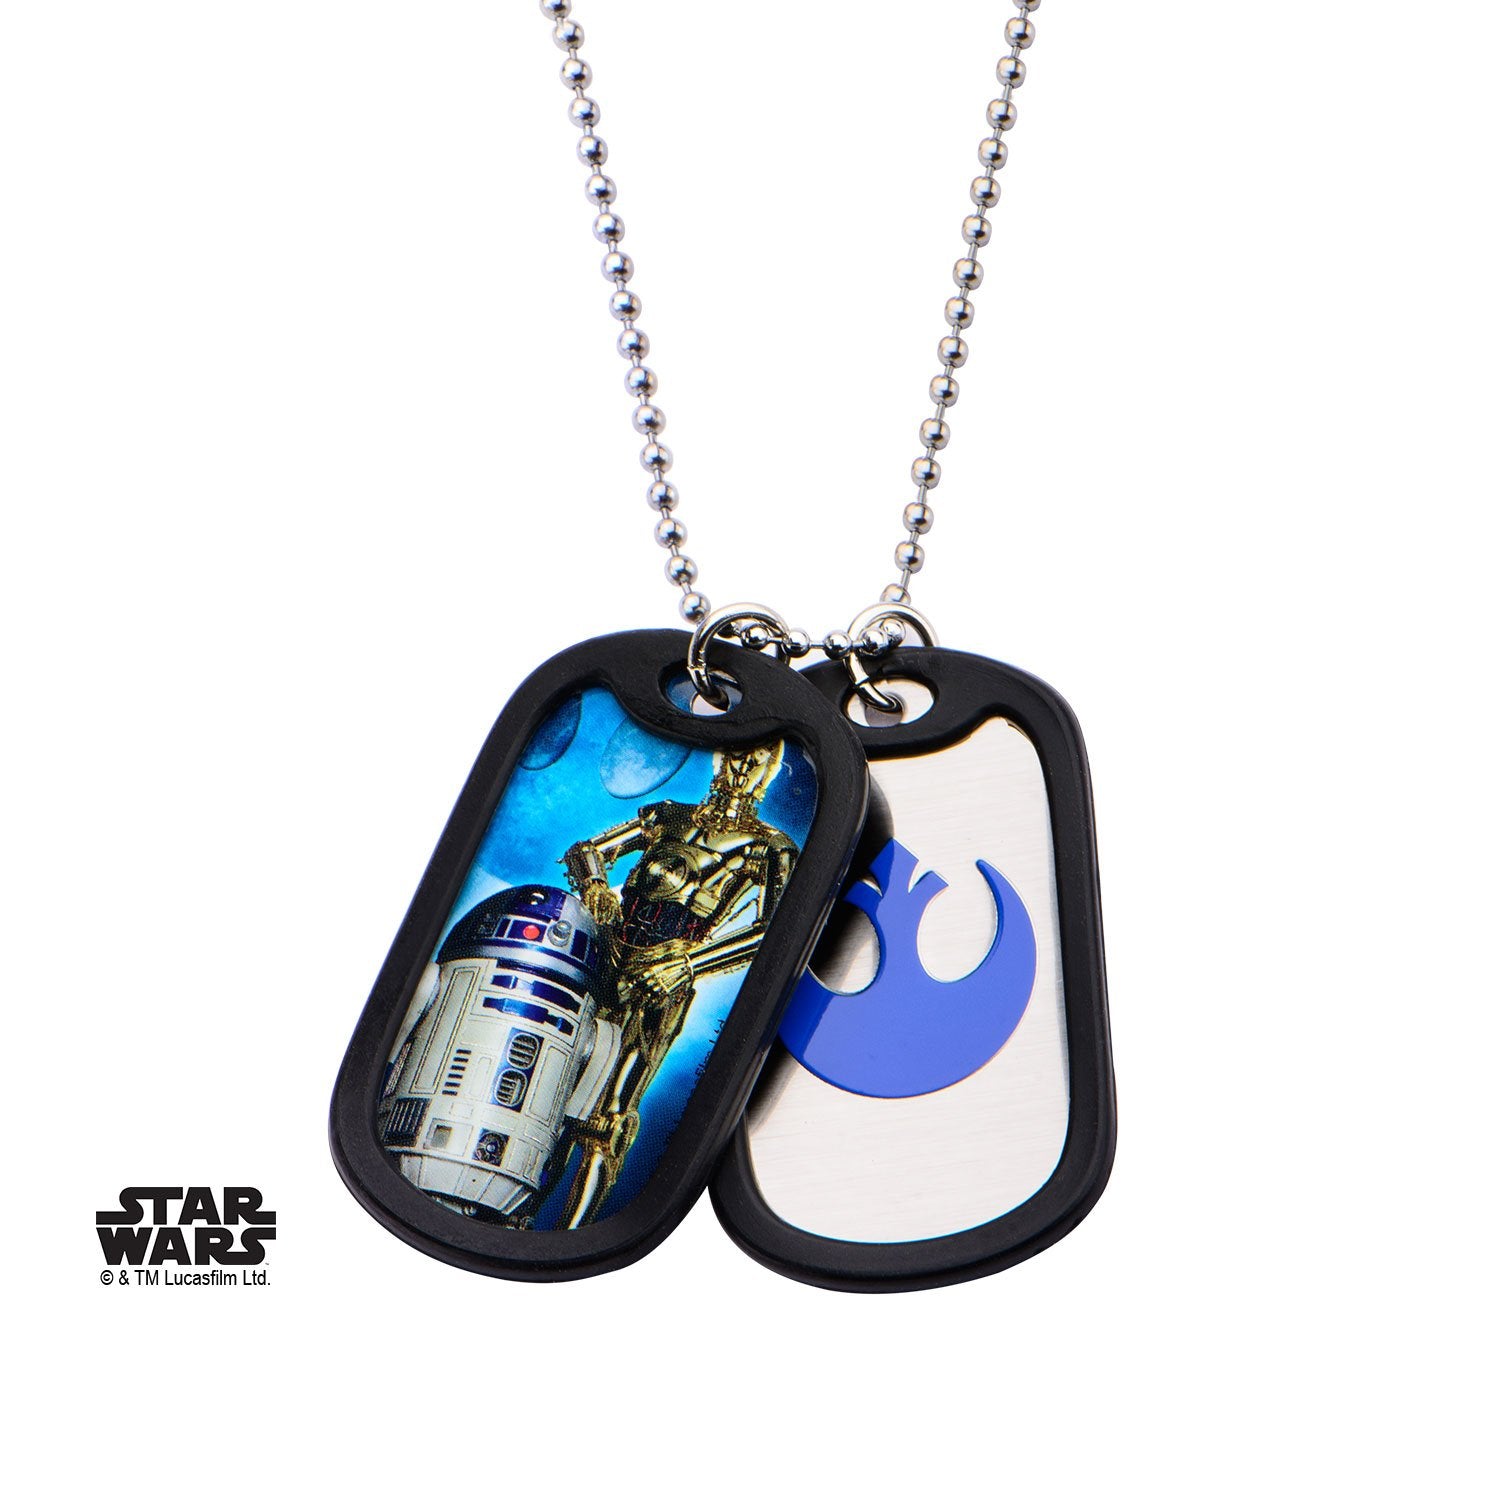 Star Wars R2-D2 & C-3PO Rubber Silencer Double Dog Tag Pendant Necklace